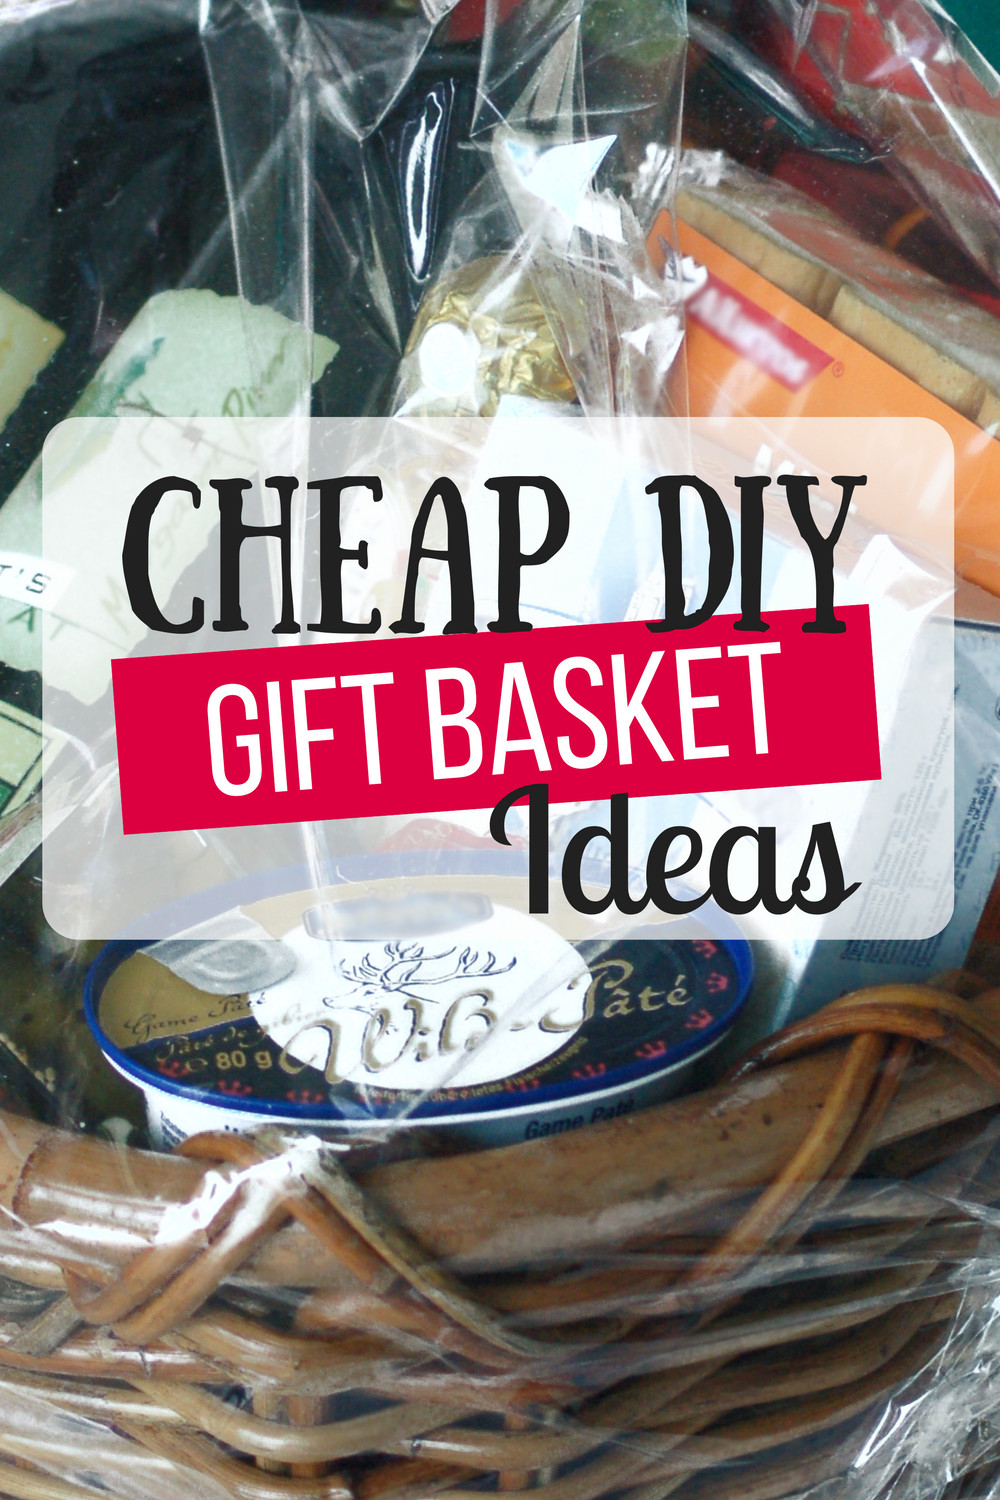 Cheap Christmas Gift Ideas For Couples
 Cheap DIY Gift Baskets The Busy Bud er